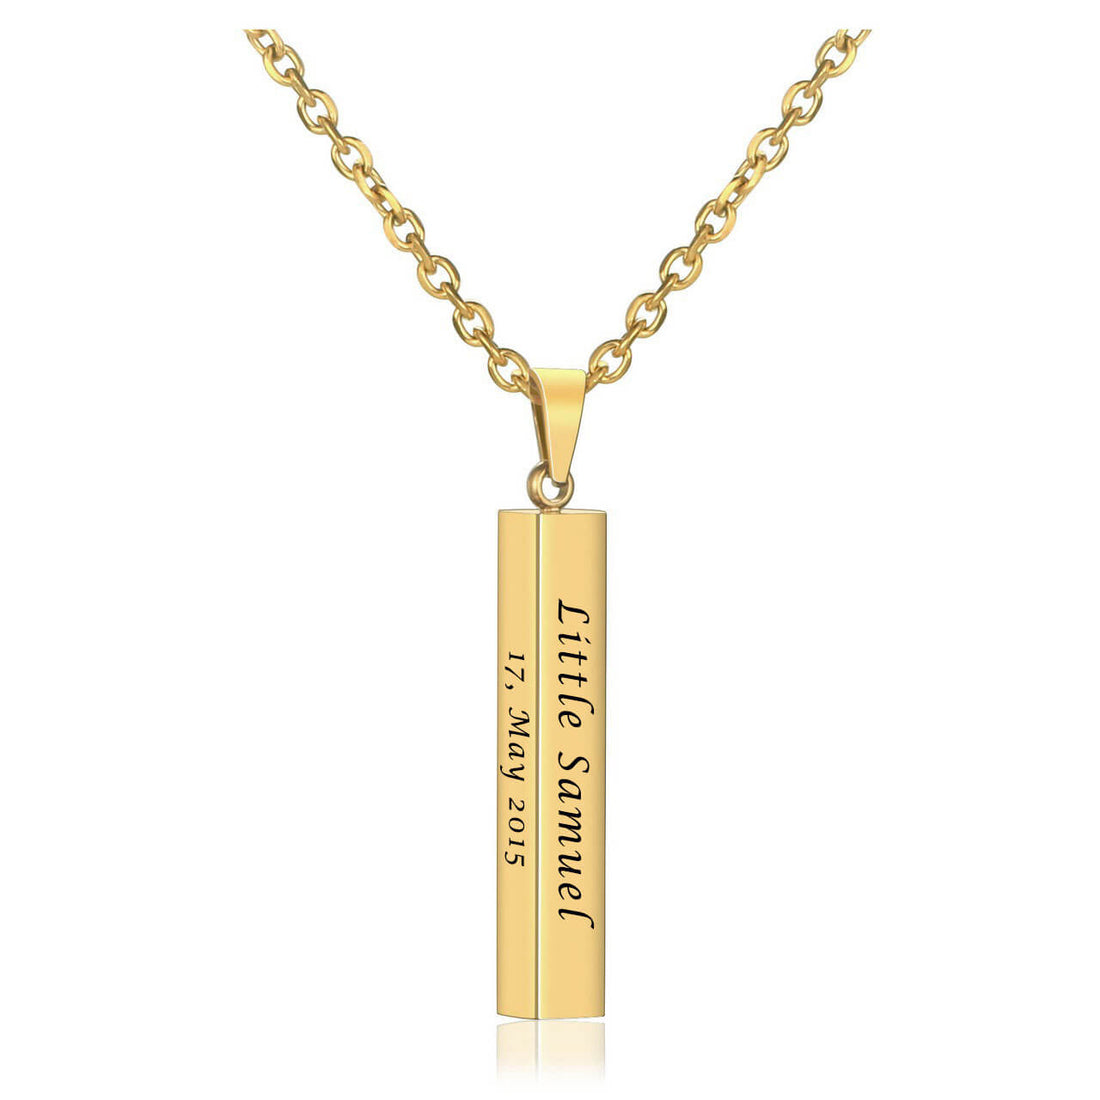 jovivi customized vertical message necklace gift for friends, jng04870